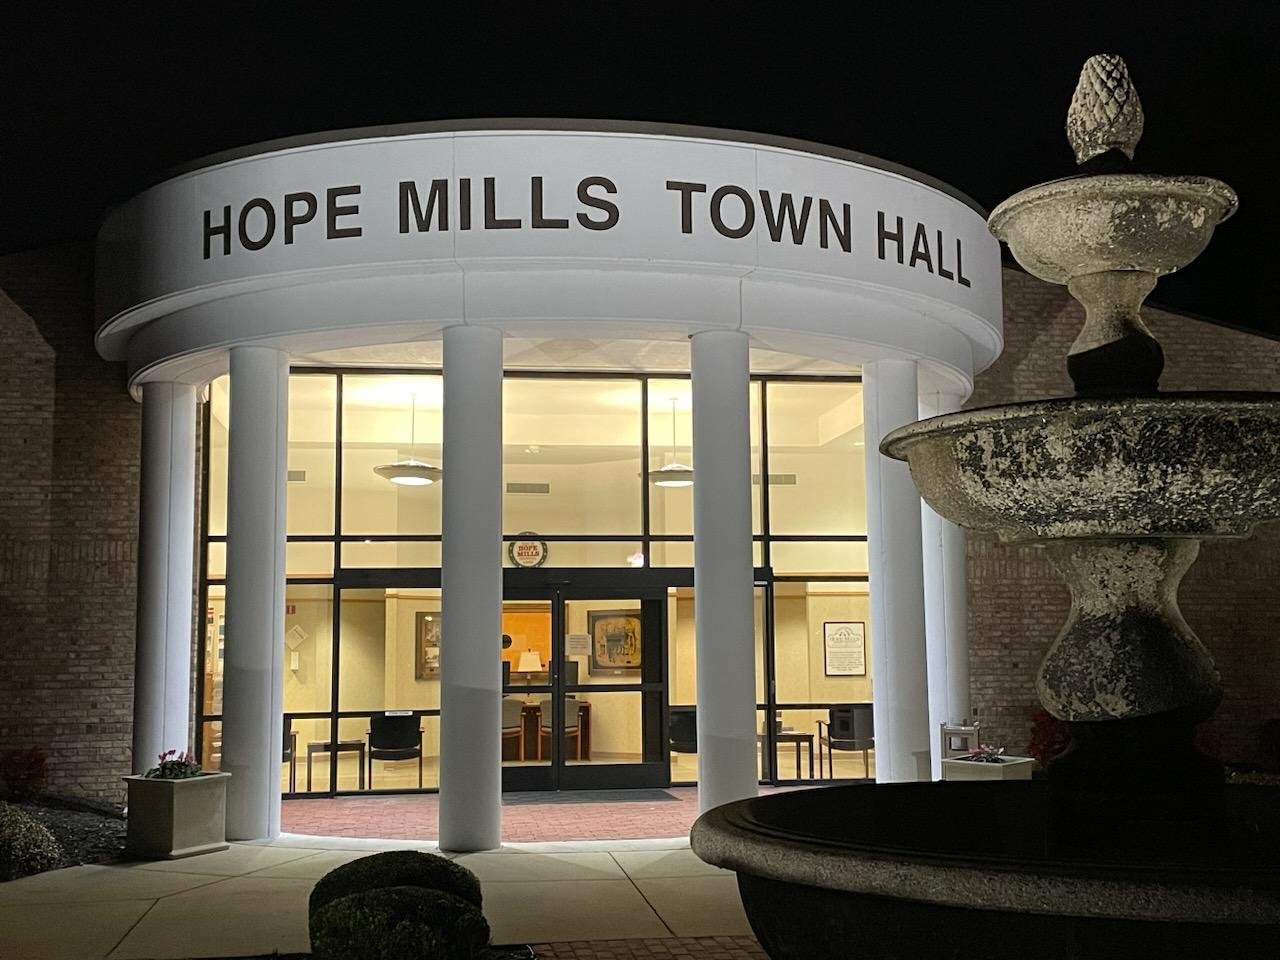 The Hope Mills Board of Commissioners will consider two rezoning requests on Monday night.